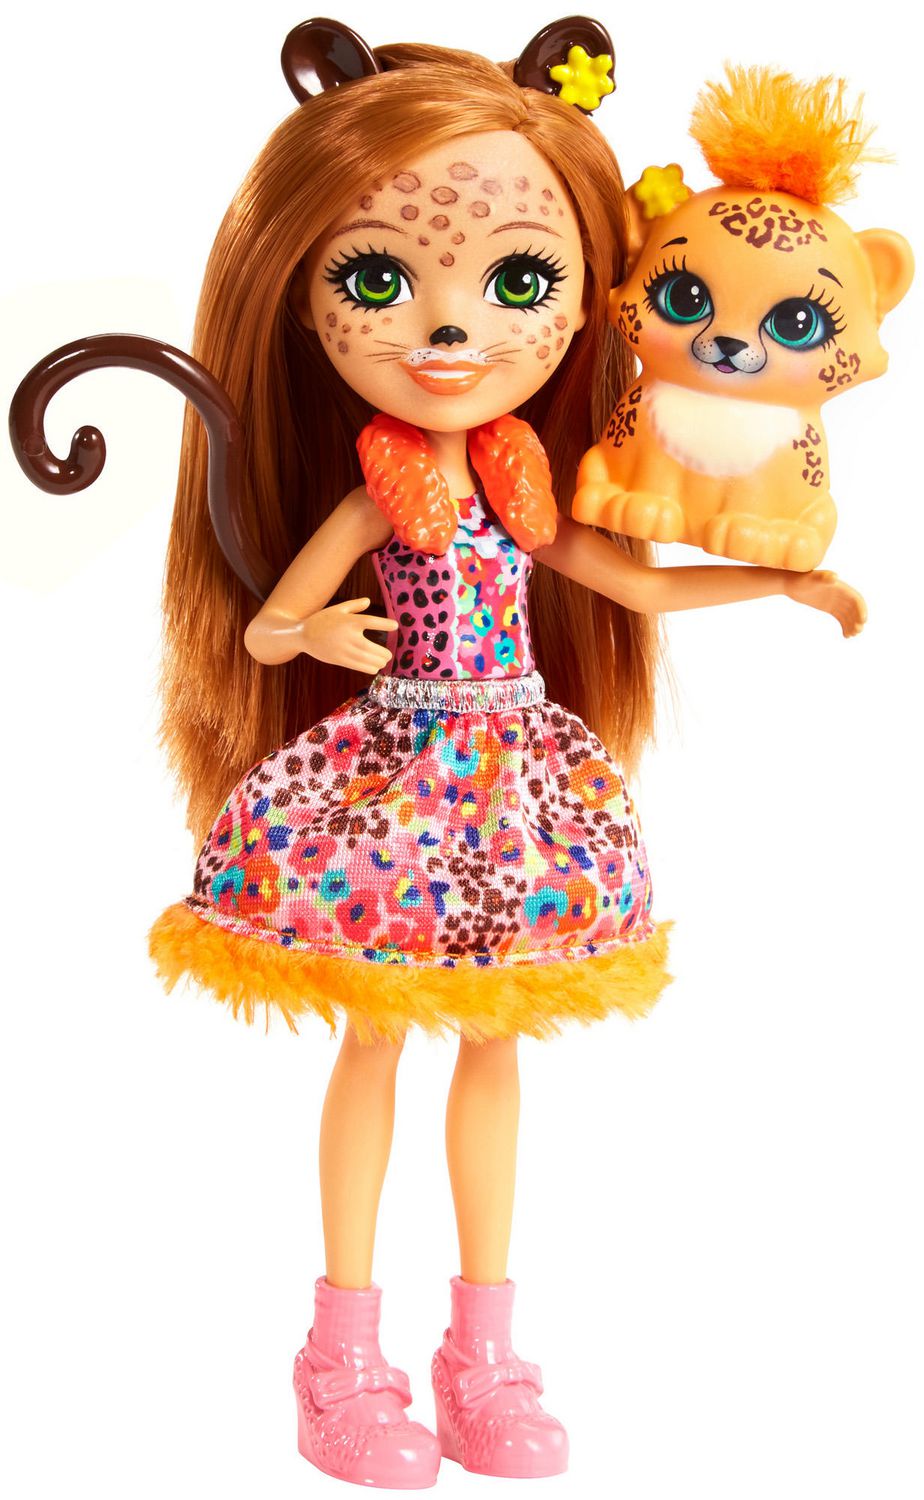 Exclusive Enchantimals Natural Friends Collection Doll 